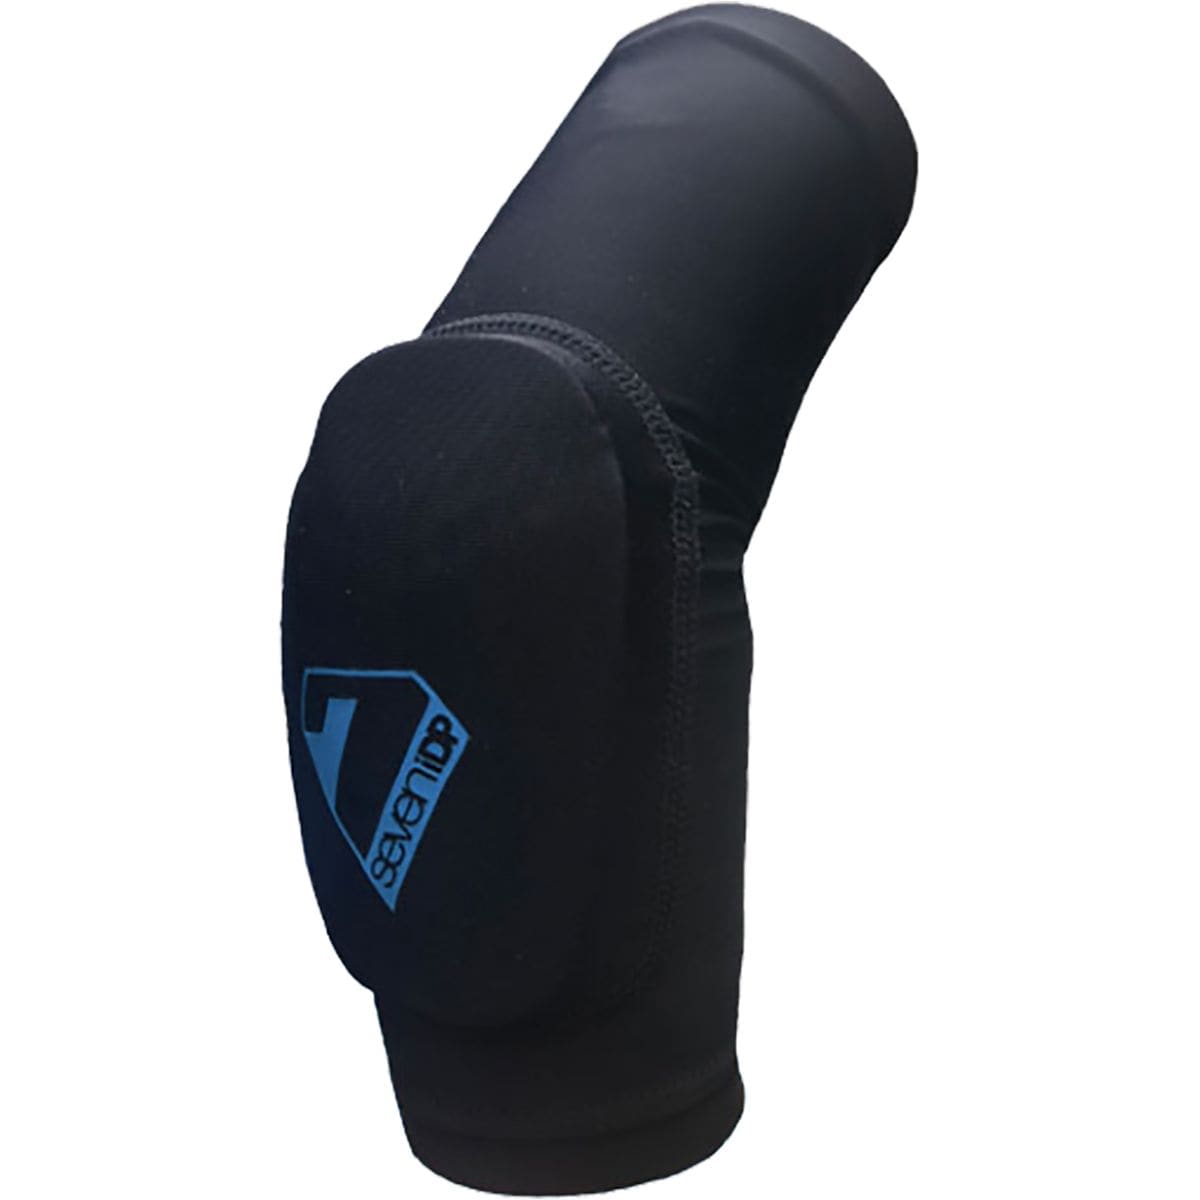 7 Protection Transition Knee Pad - Kids' Black, S